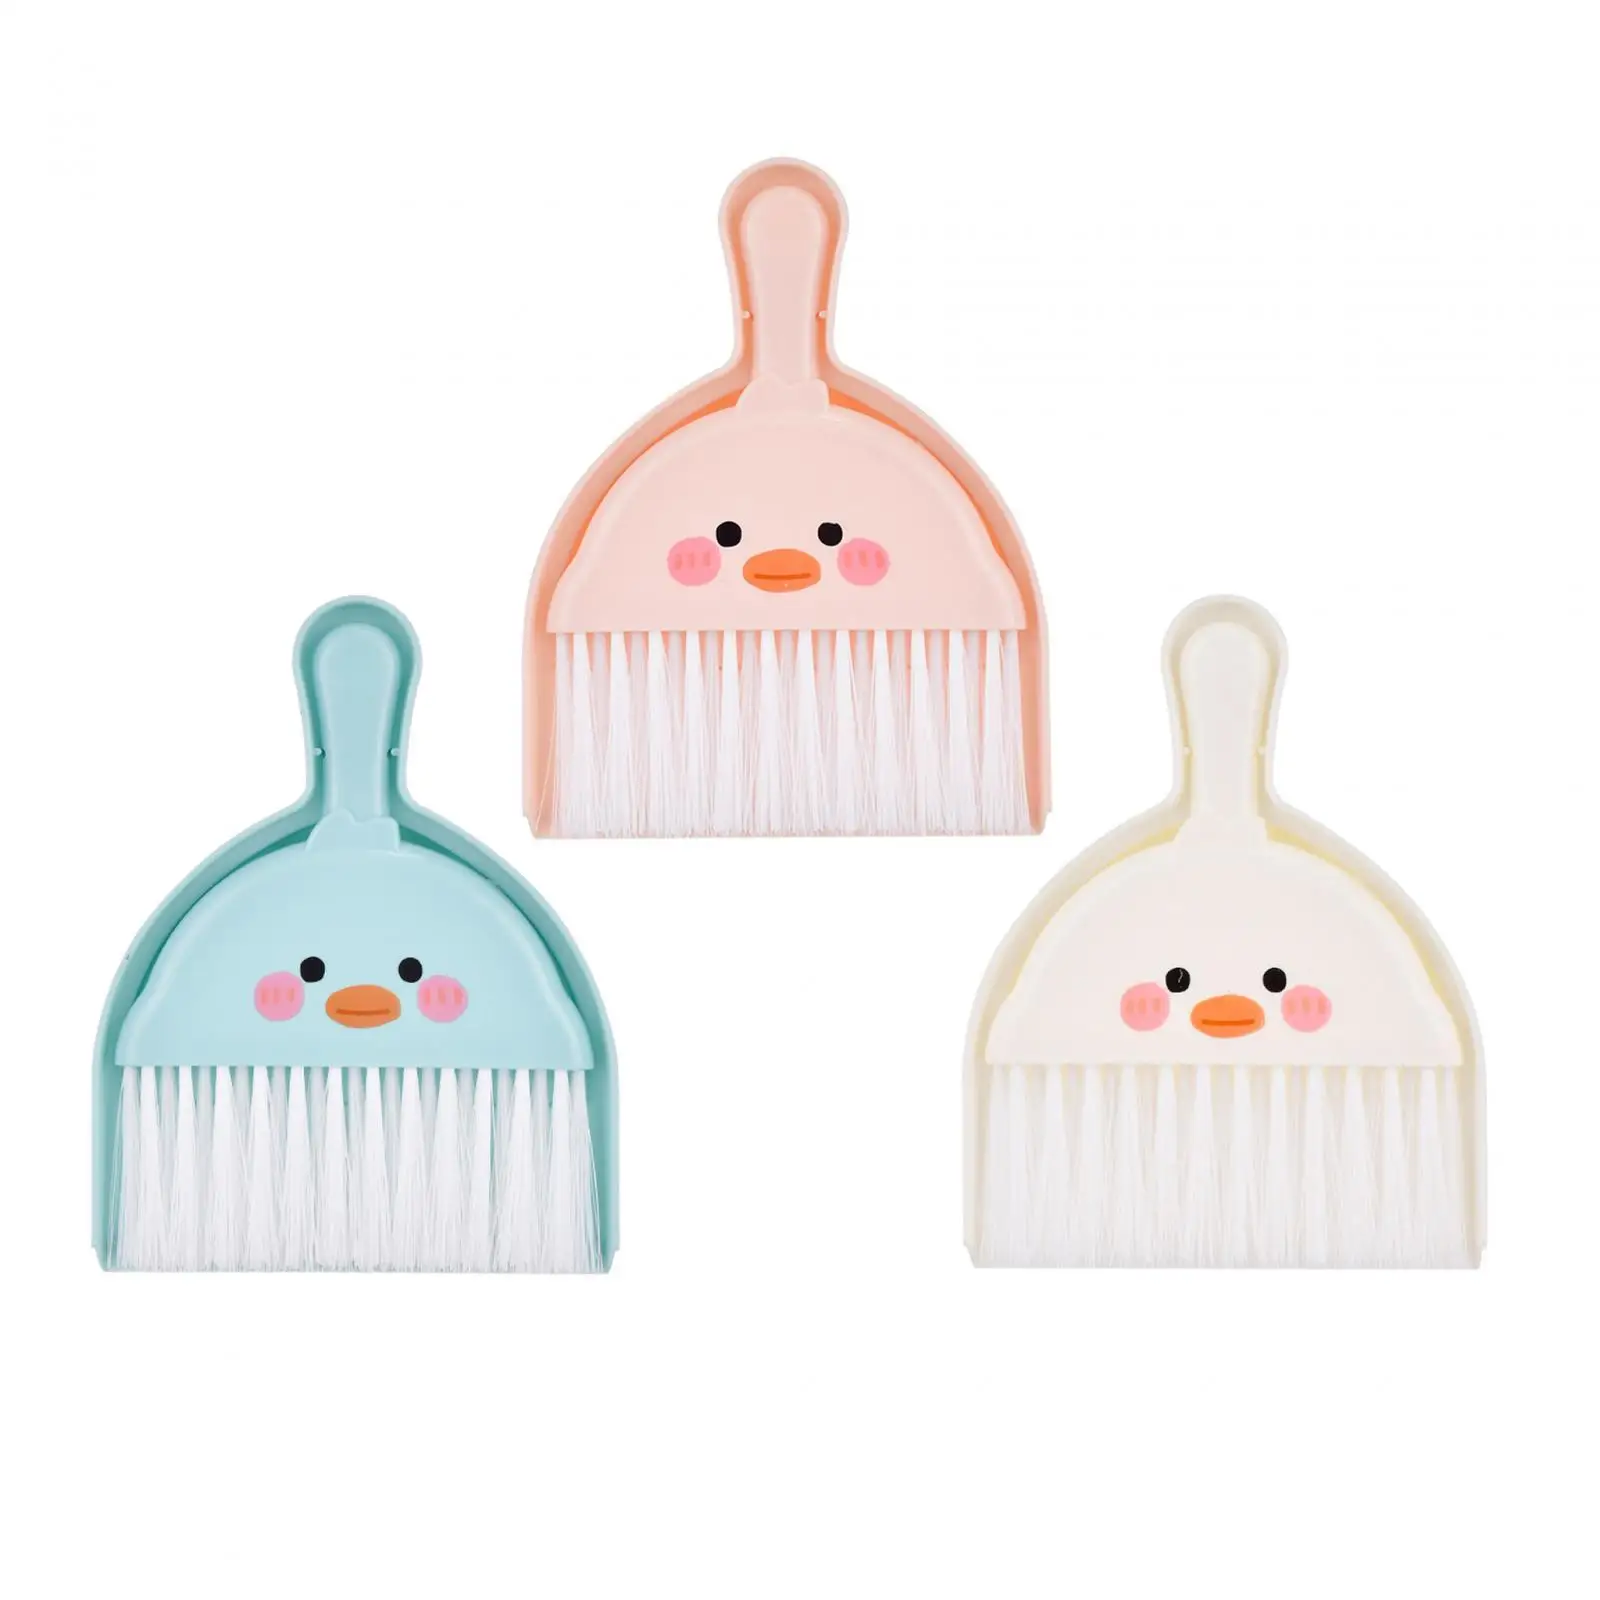 Mini Dustpan and Brush Set, Mini Cleaning Tool Small Broom and Dustpan for Desktop Computer Keyboard Car Window